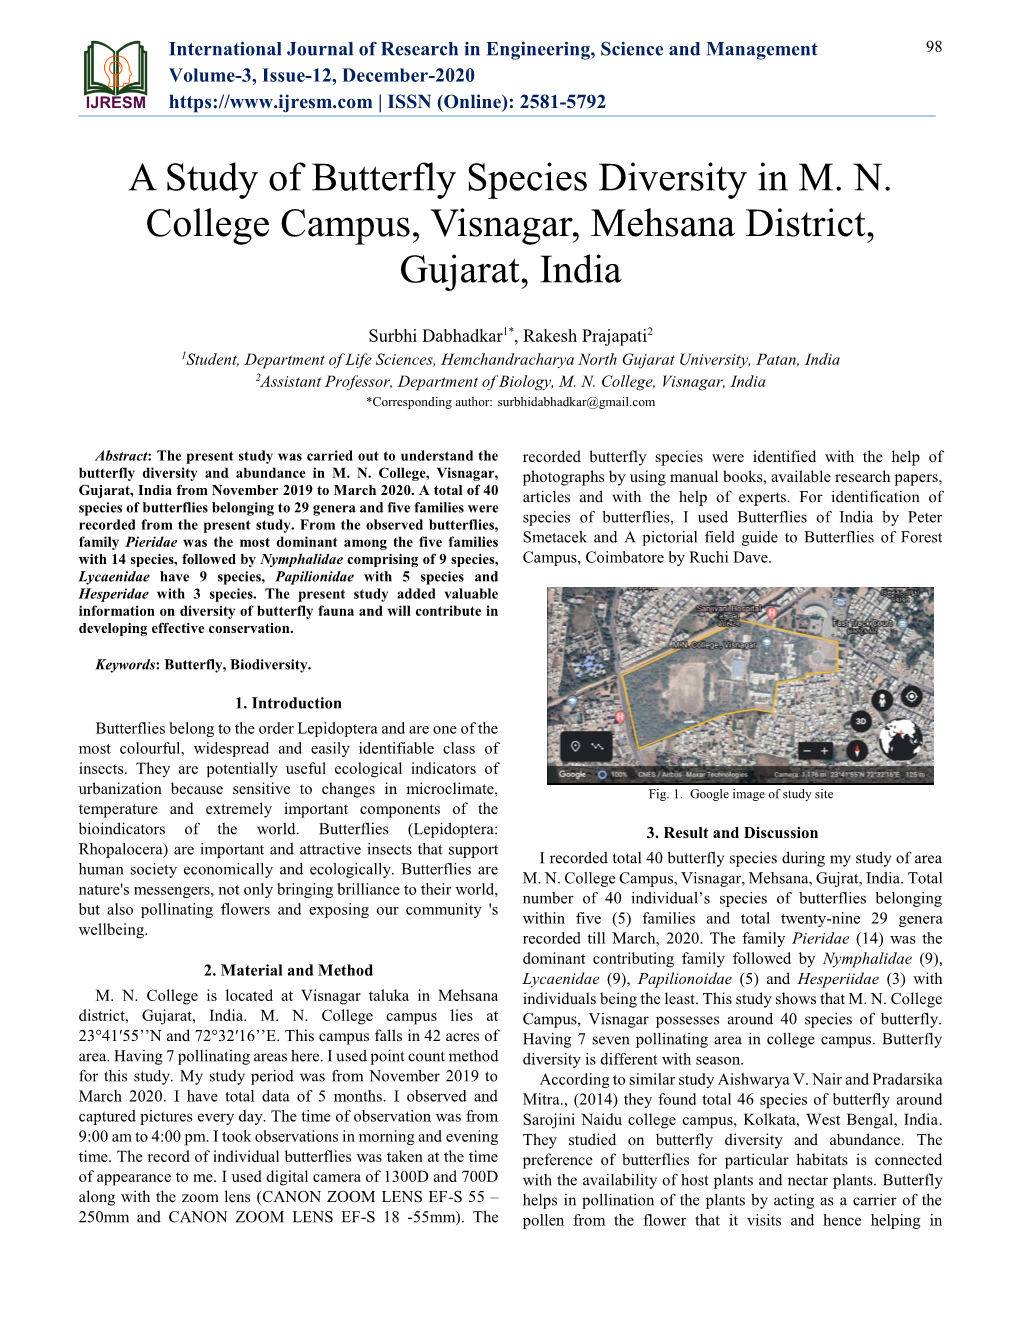 A Study of Butterfly Species Diversity in M. N. College Campus, Visnagar, Mehsana District, Gujarat, India